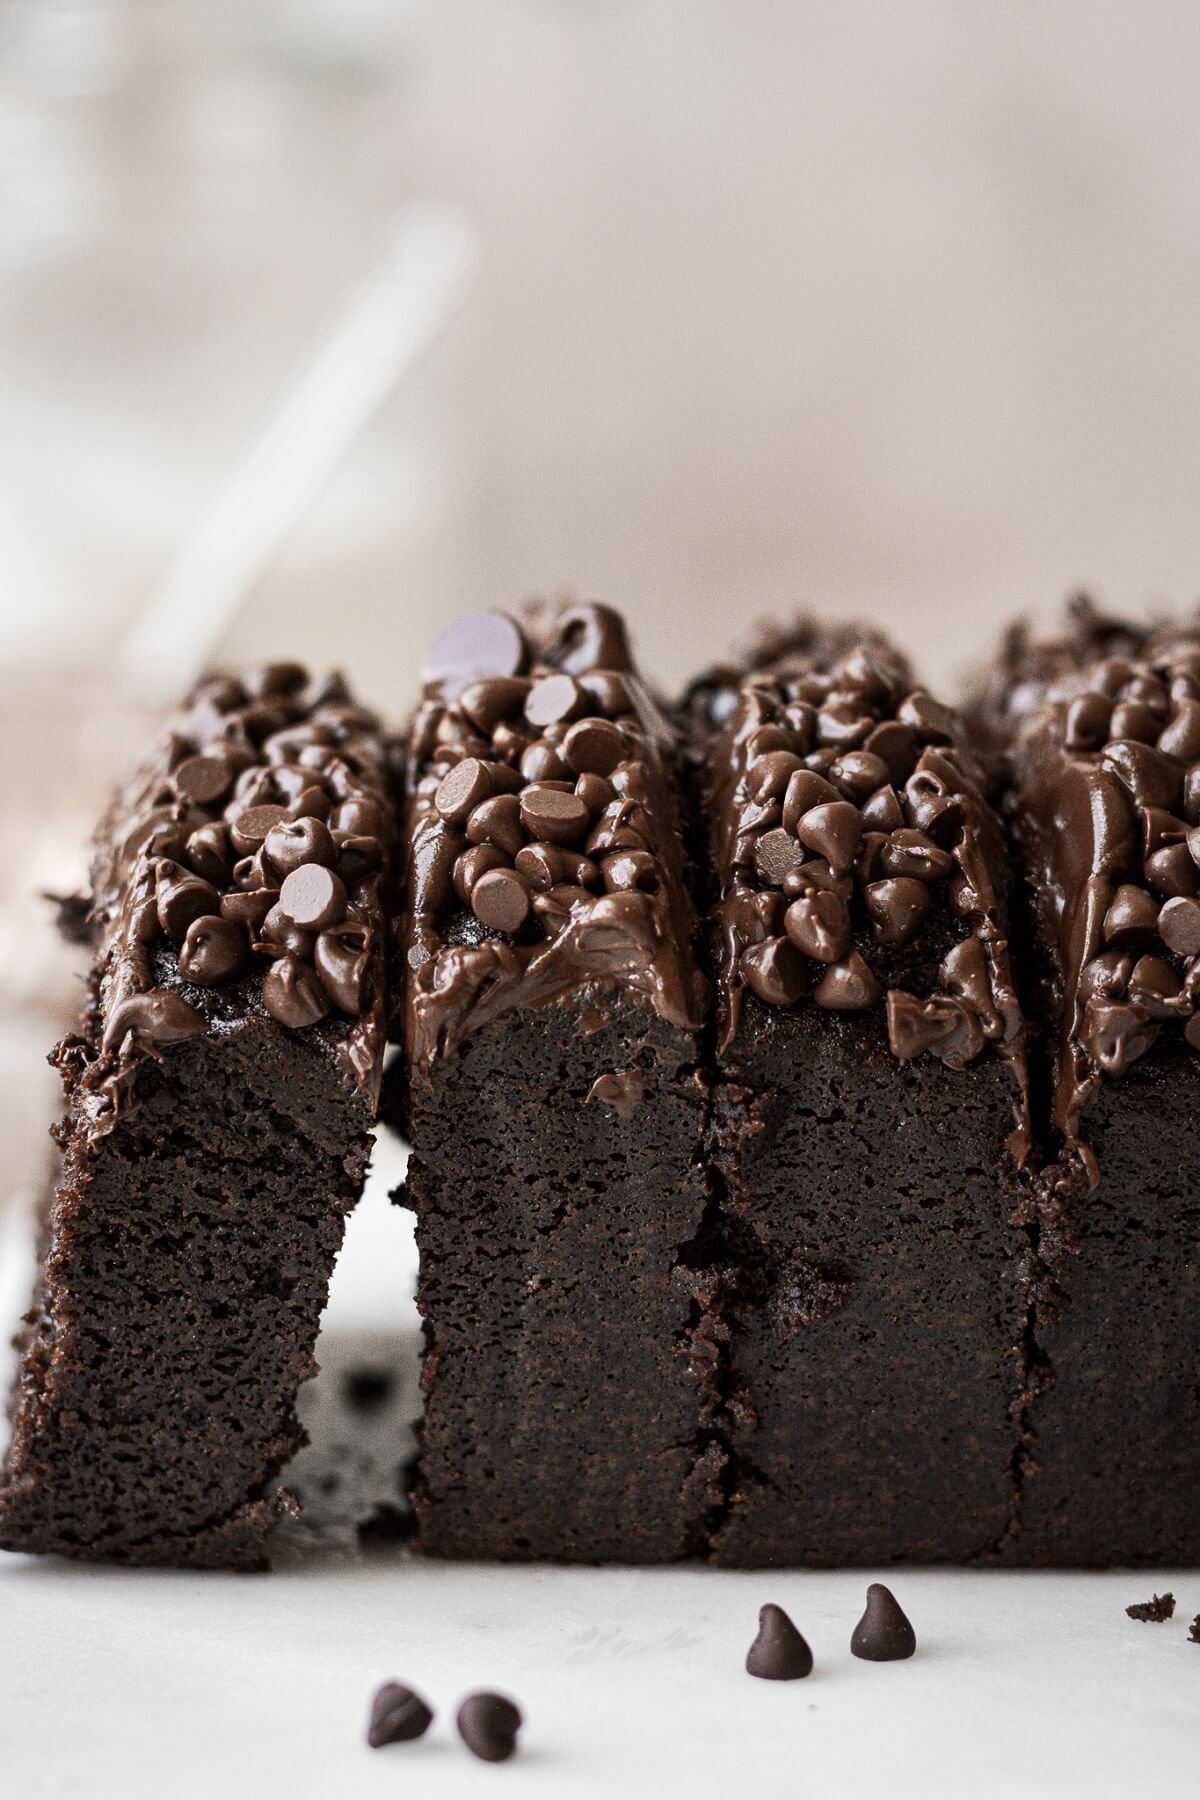 Slices of chocolate loaf cake.